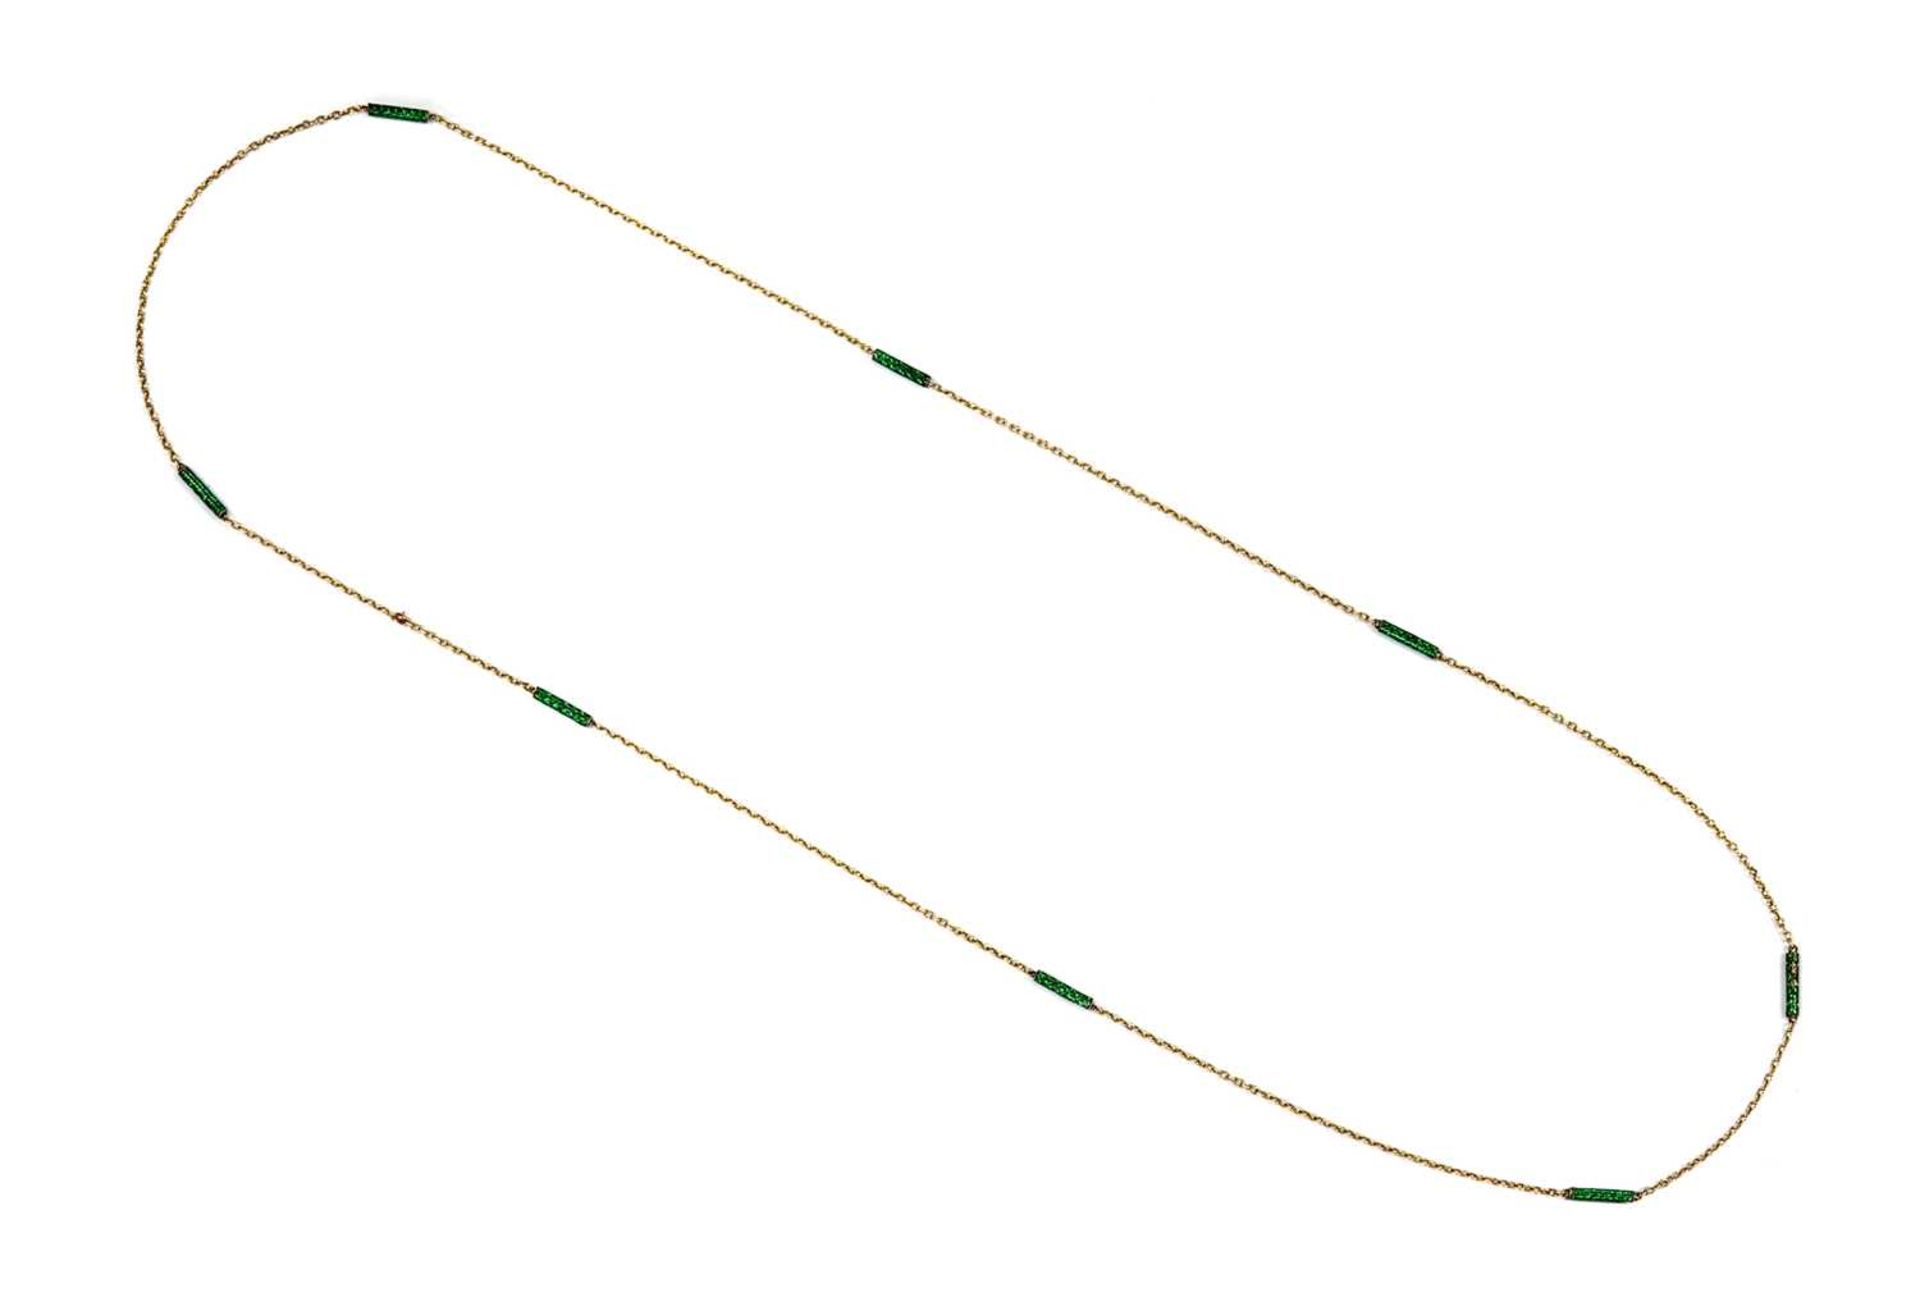 A silver and gold enamel chain,